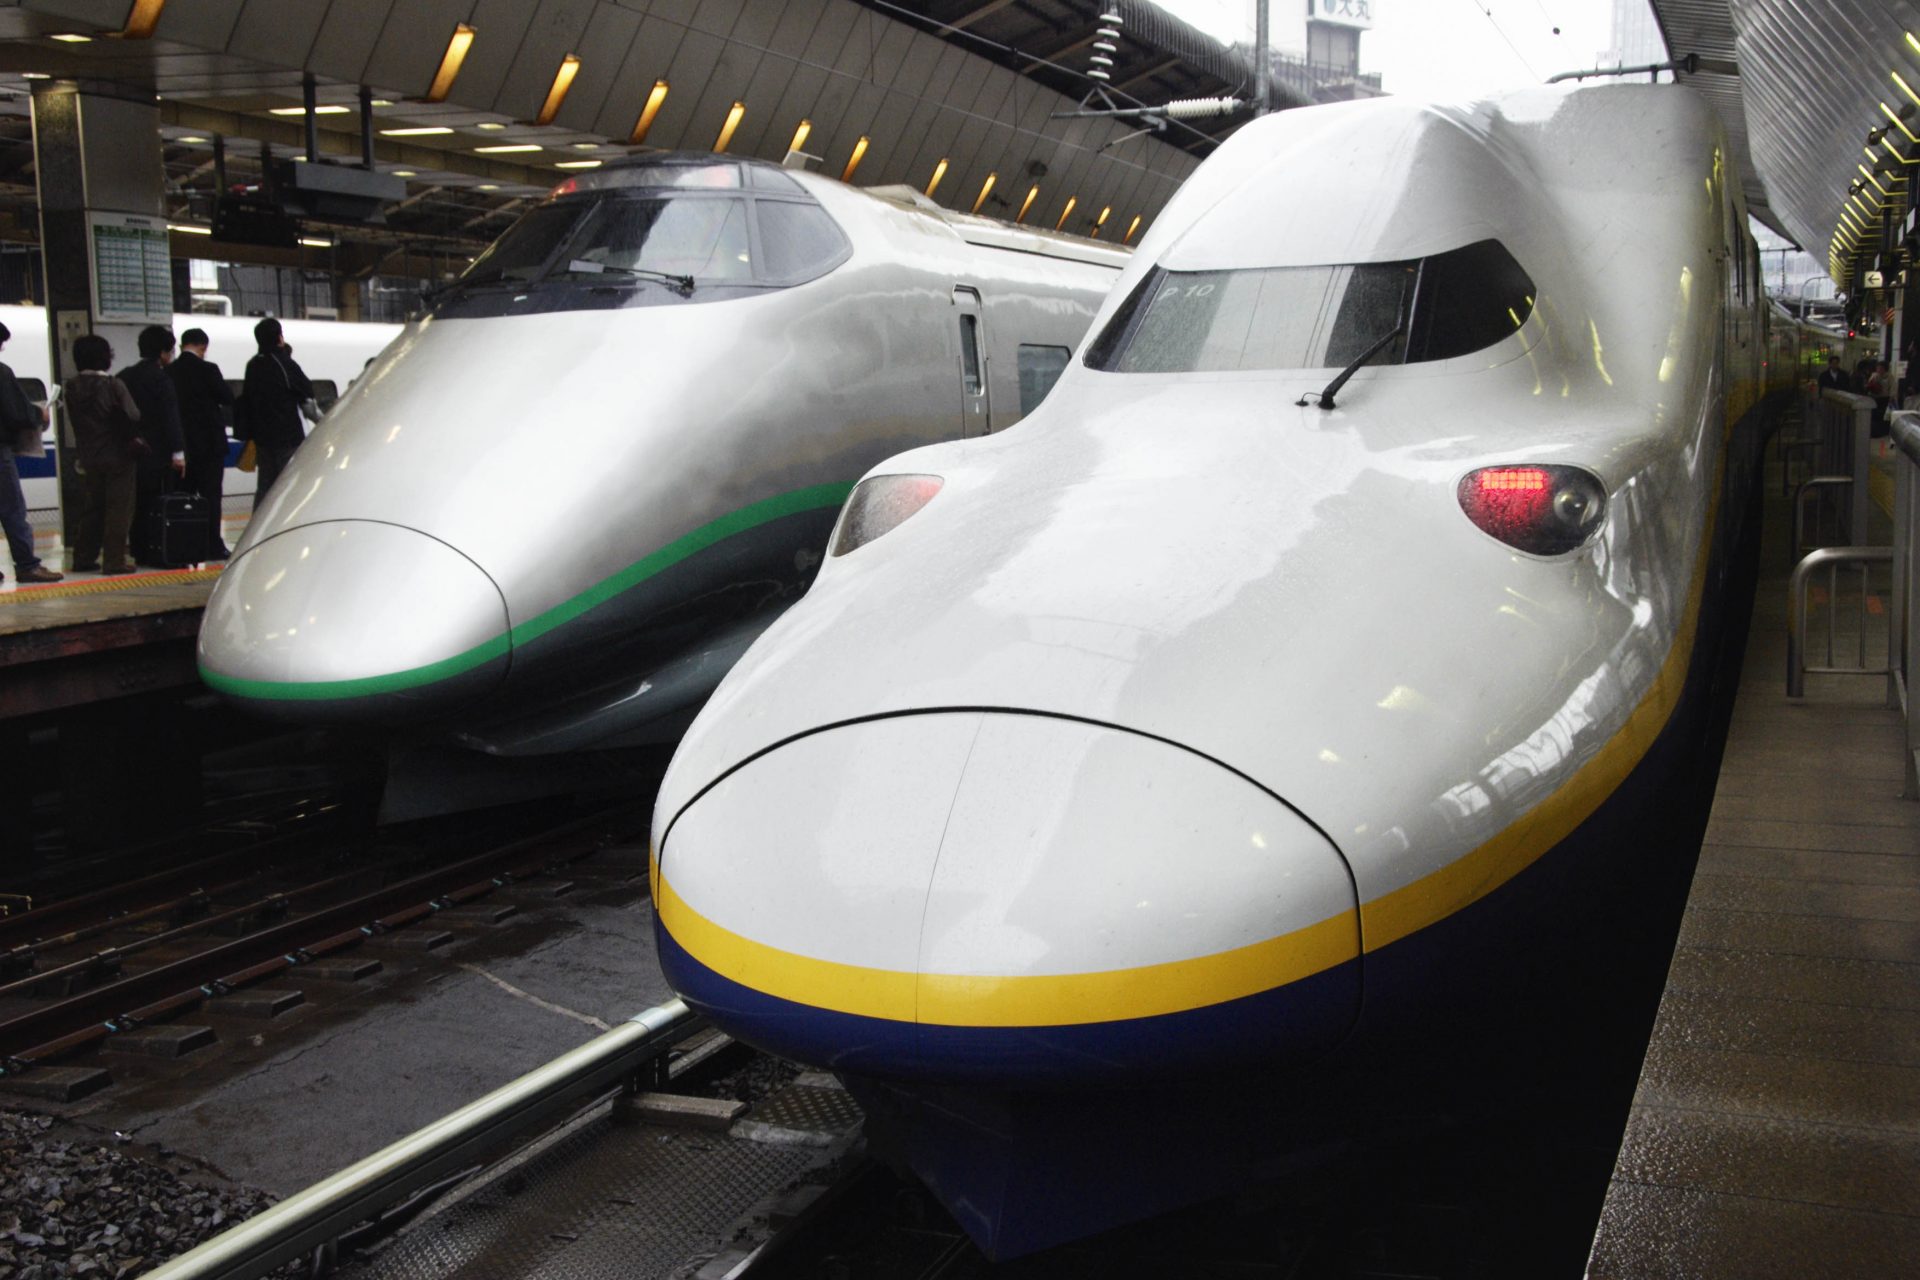 <p>In addition, travelling by train is one of the greener ways to get around and also saves you the inconvenience of having to go to the airport and deal with long security lines. Join us as we take a look at the top ten fastest trains in the world.</p>